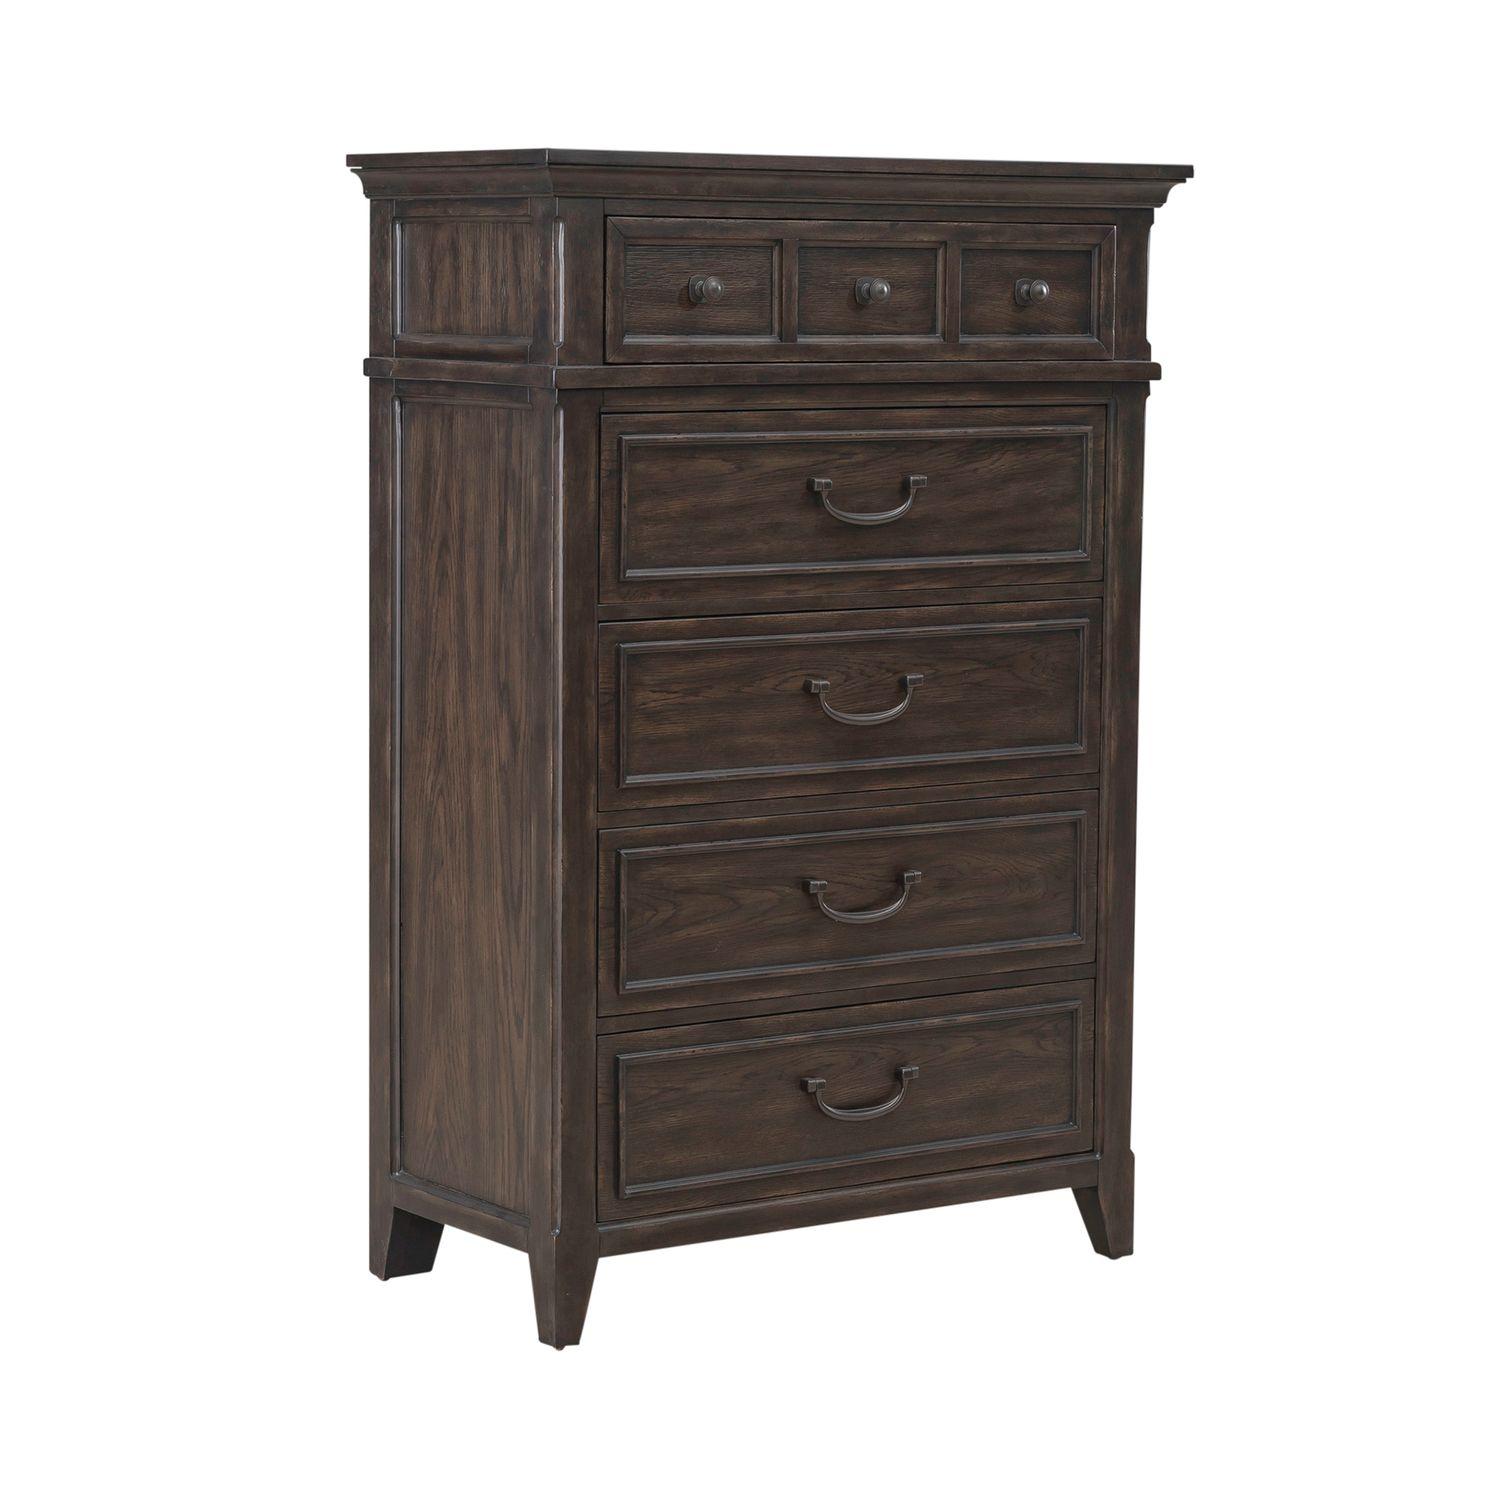 Transitional 5 Drawer Chest Paradise Valley (297-BR) 297-BR41 in Brown 